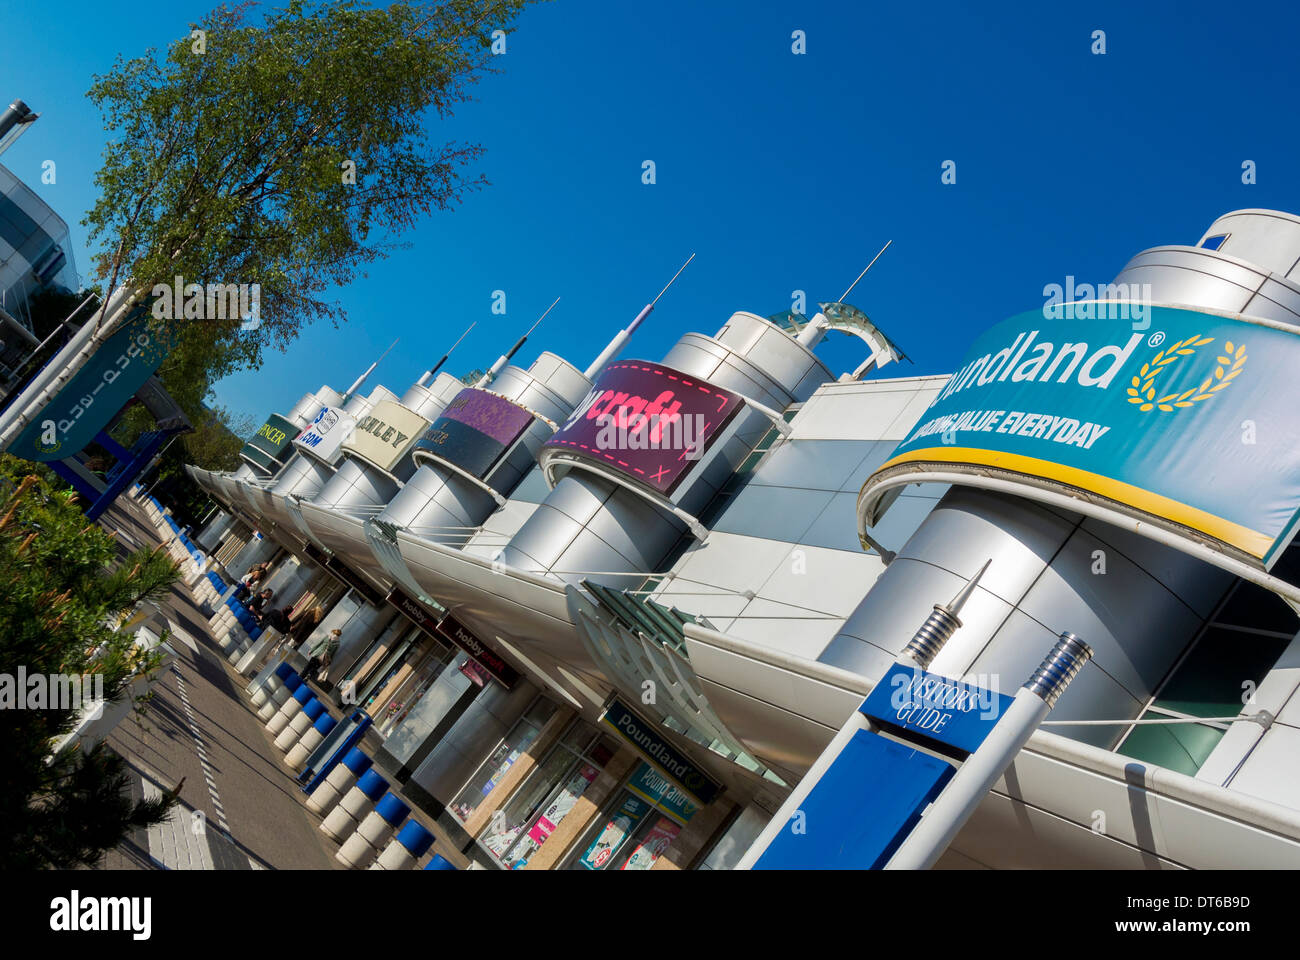 Shop brand signs at out of town shopping centre, UK. Stock Photo